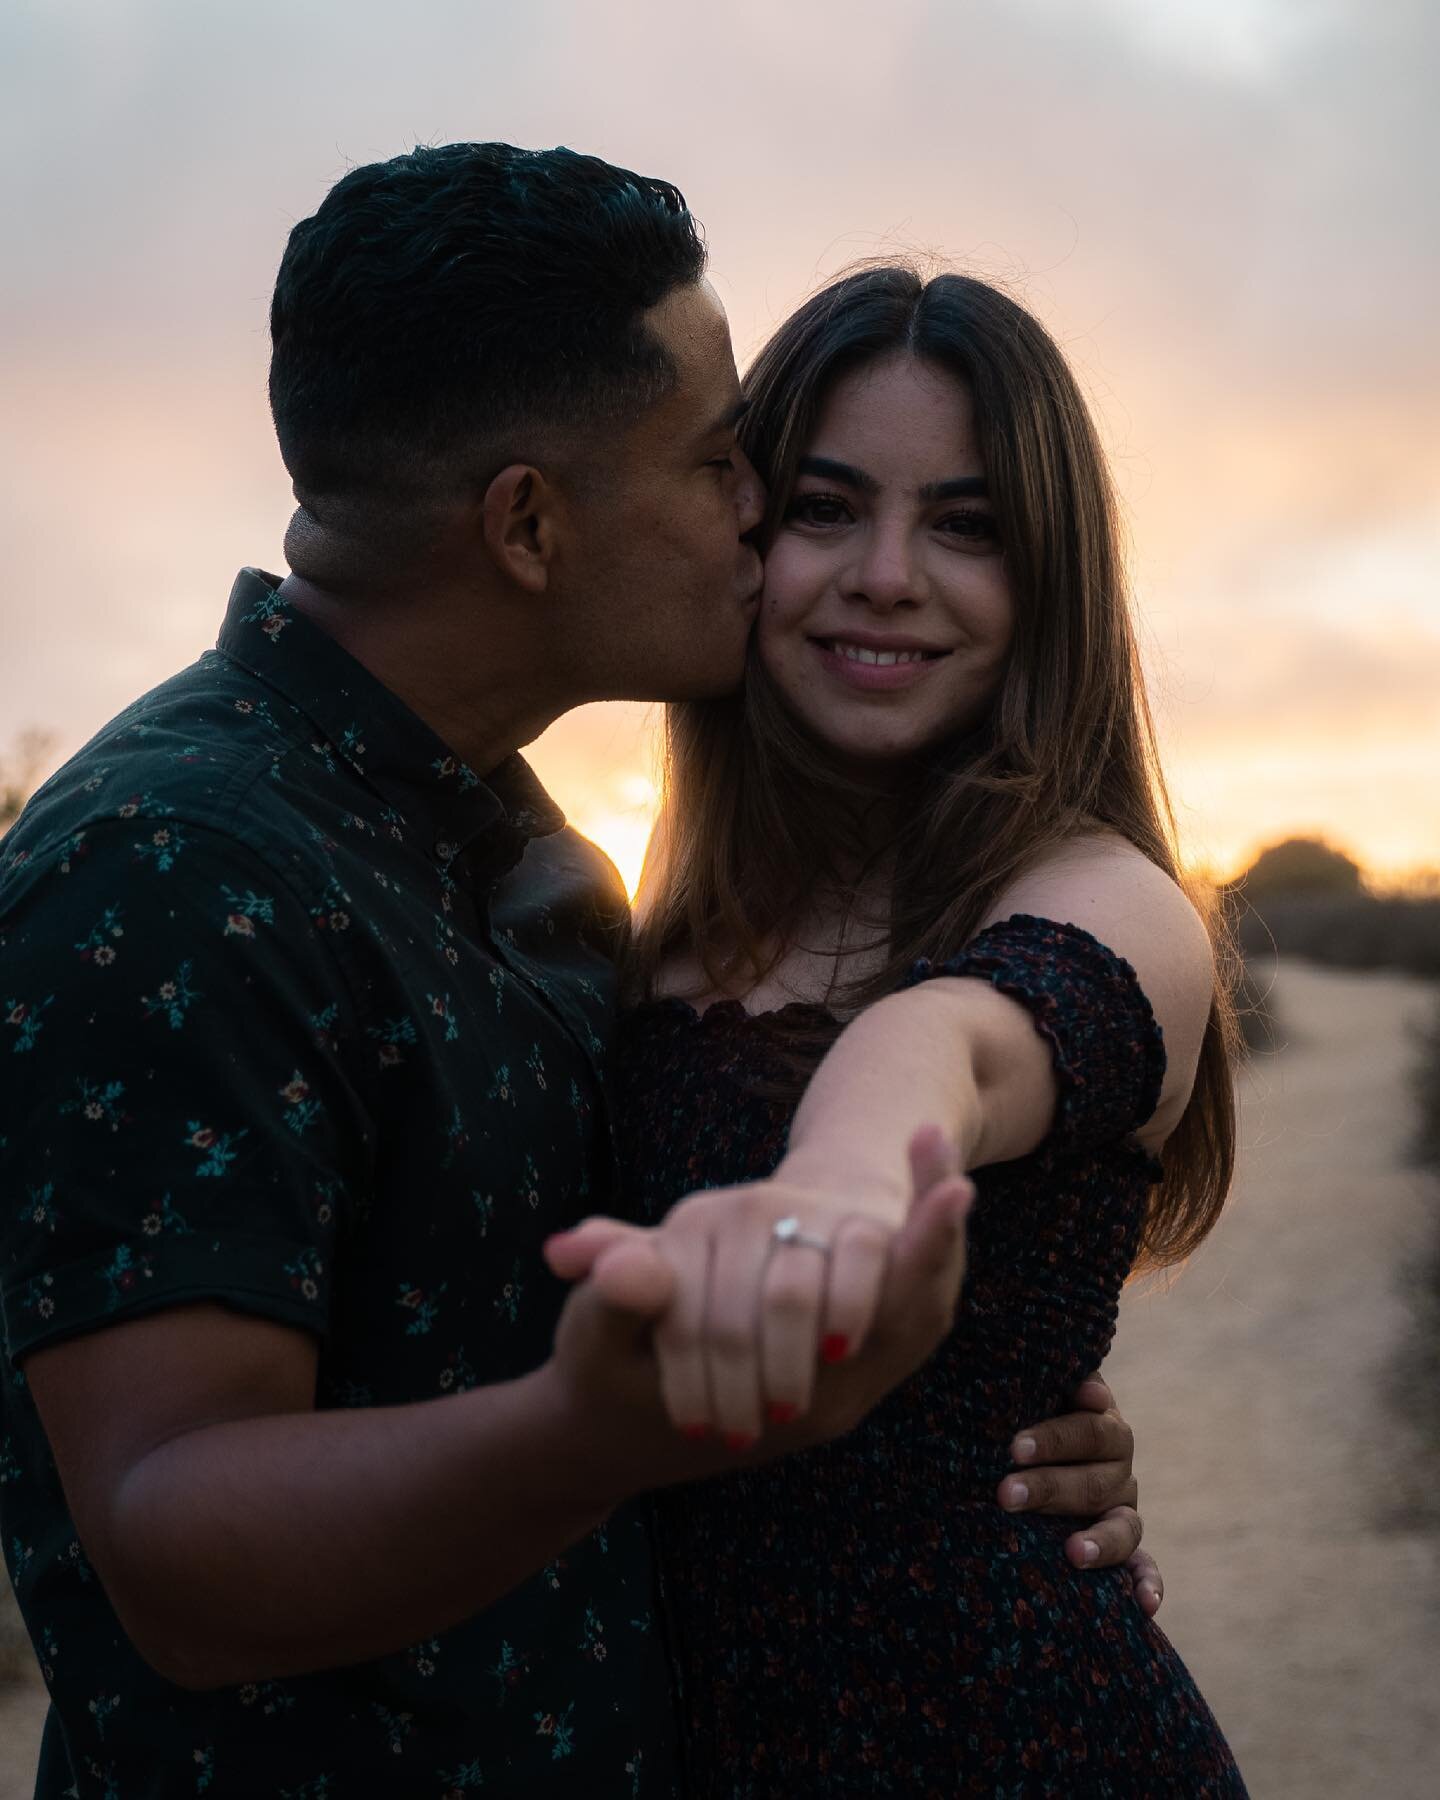 My guy out here making money moves 🤩🙏🏼 congrats to Oscar and Karina on the engagement, easily one of the sweetest couples i&rsquo;ve ever worked with. There&rsquo;s nothing better than working with a fun couple, I truly believe that!
.
.
.
.
.
#so